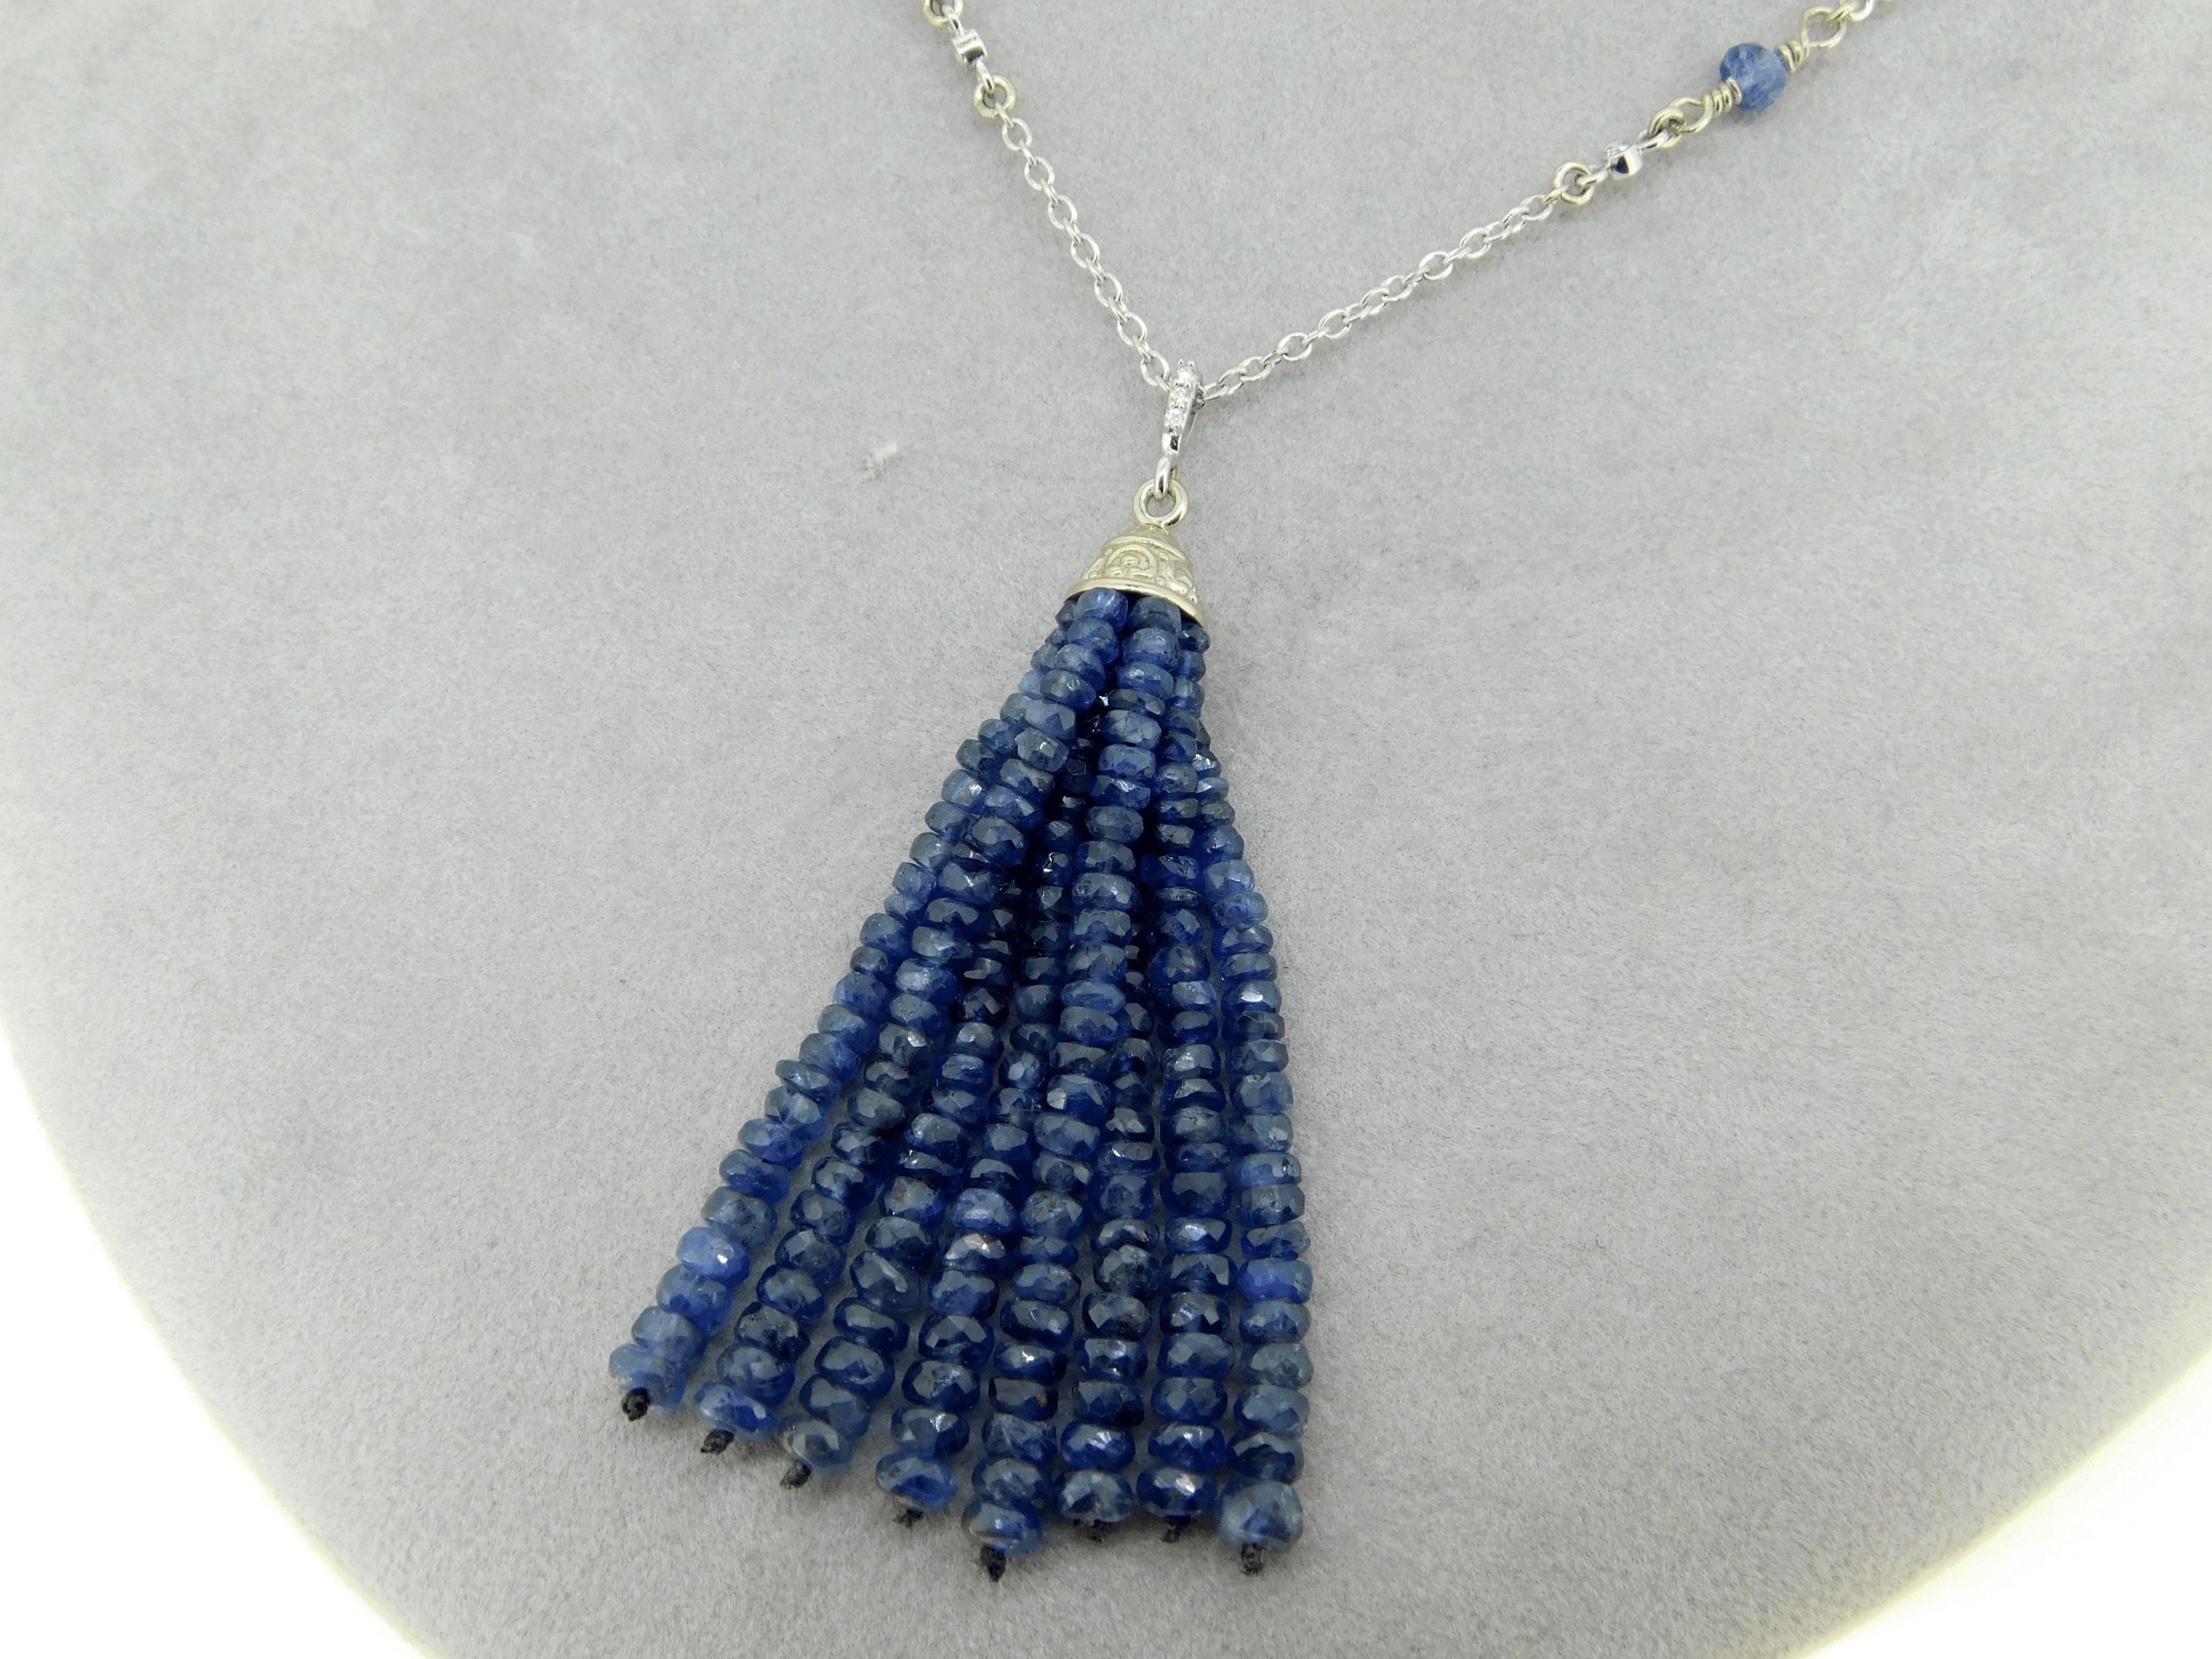 14k White Gold Genuine Natural Diamond and Blue Sapphire Tassel Pendant (#J4682)

14k white gold blue sapphire tassel pendant with twenty-two carats of royal blue faceted sapphire beads. The pendant measures 2 1/2